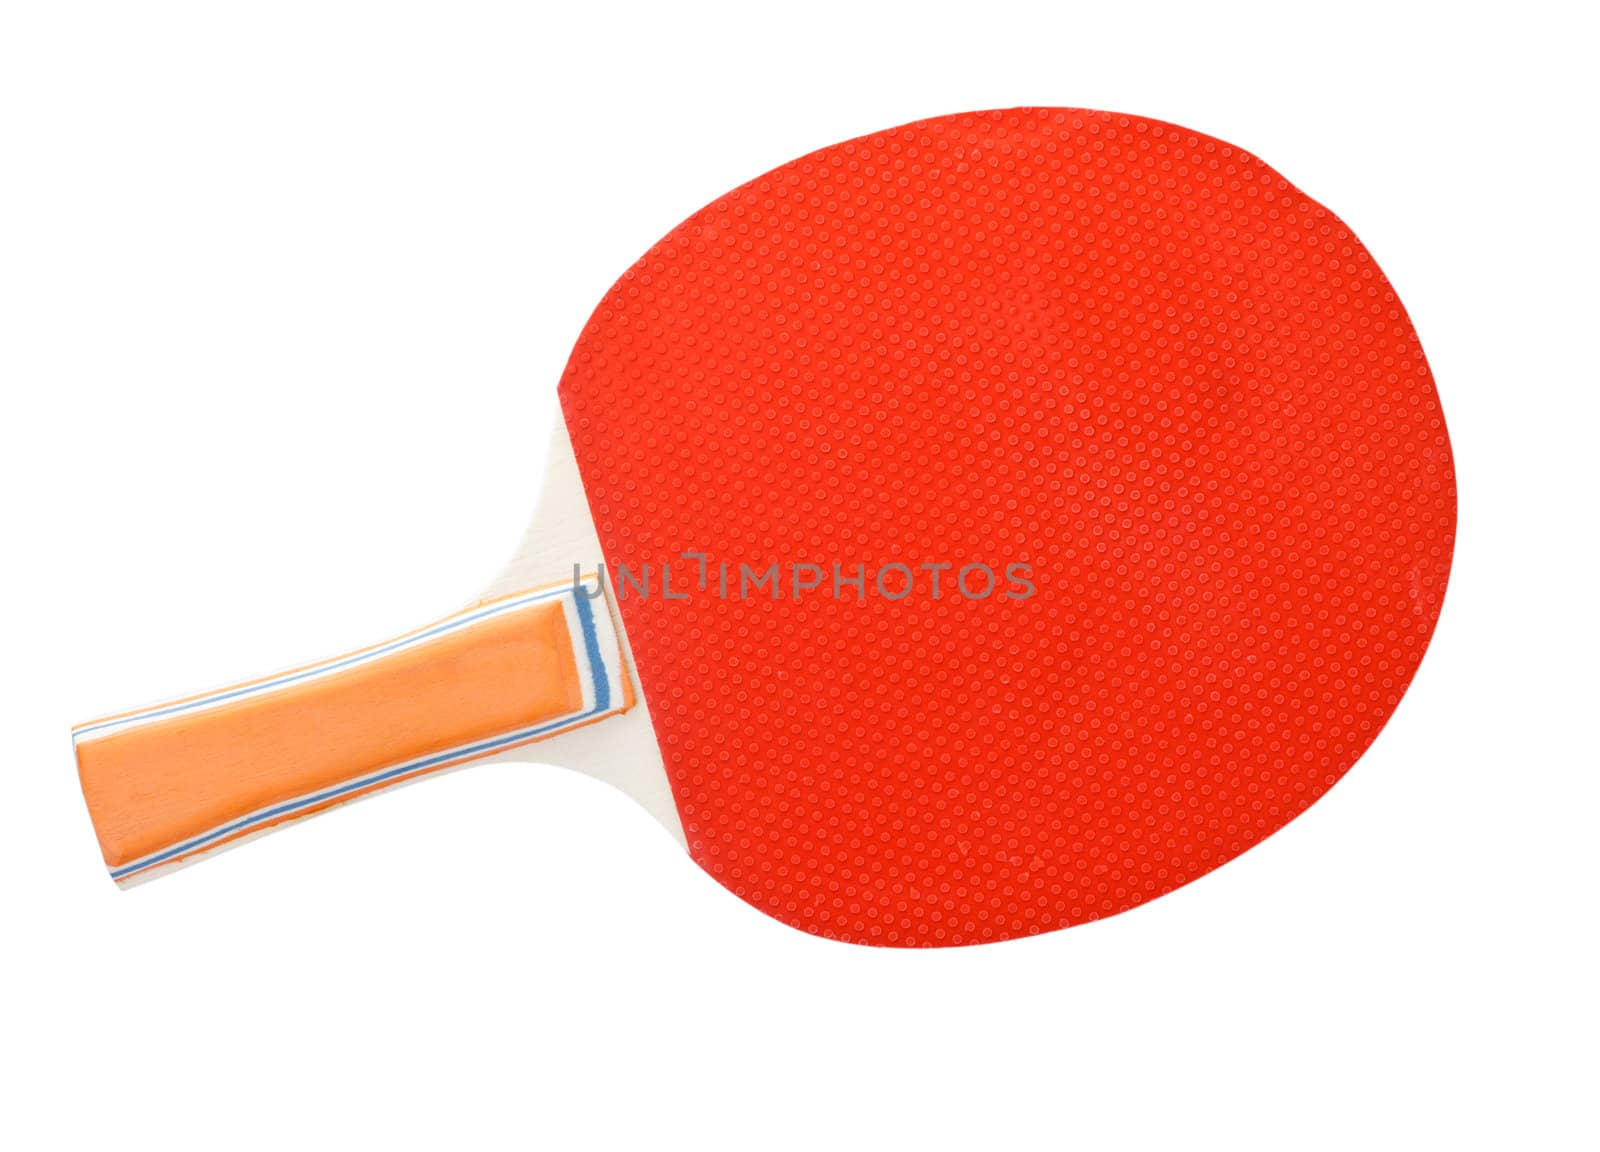 table tennis racket isolated on white background